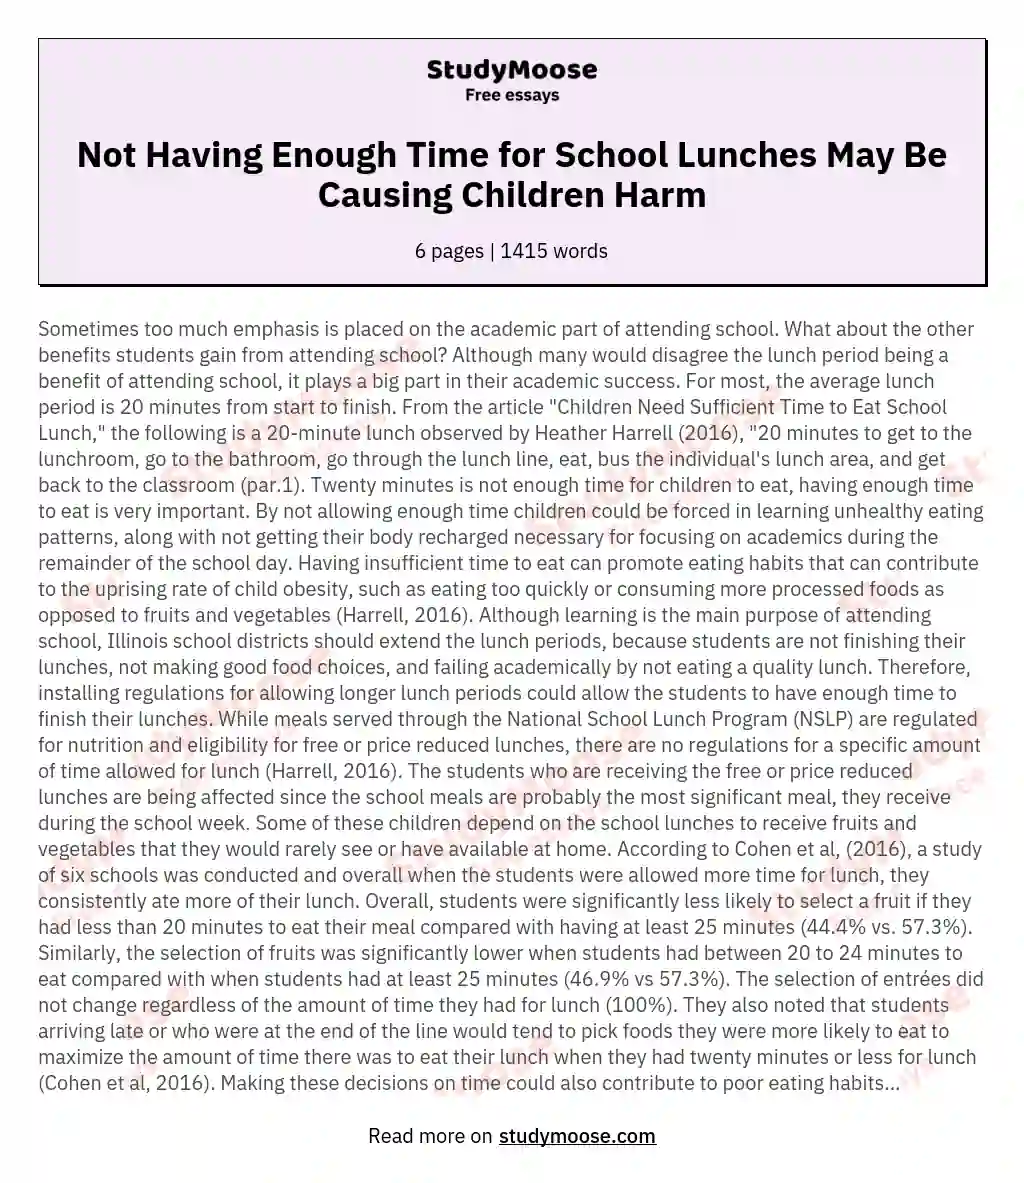 Not Having Enough Time for School Lunches May Be Causing Children Harm essay